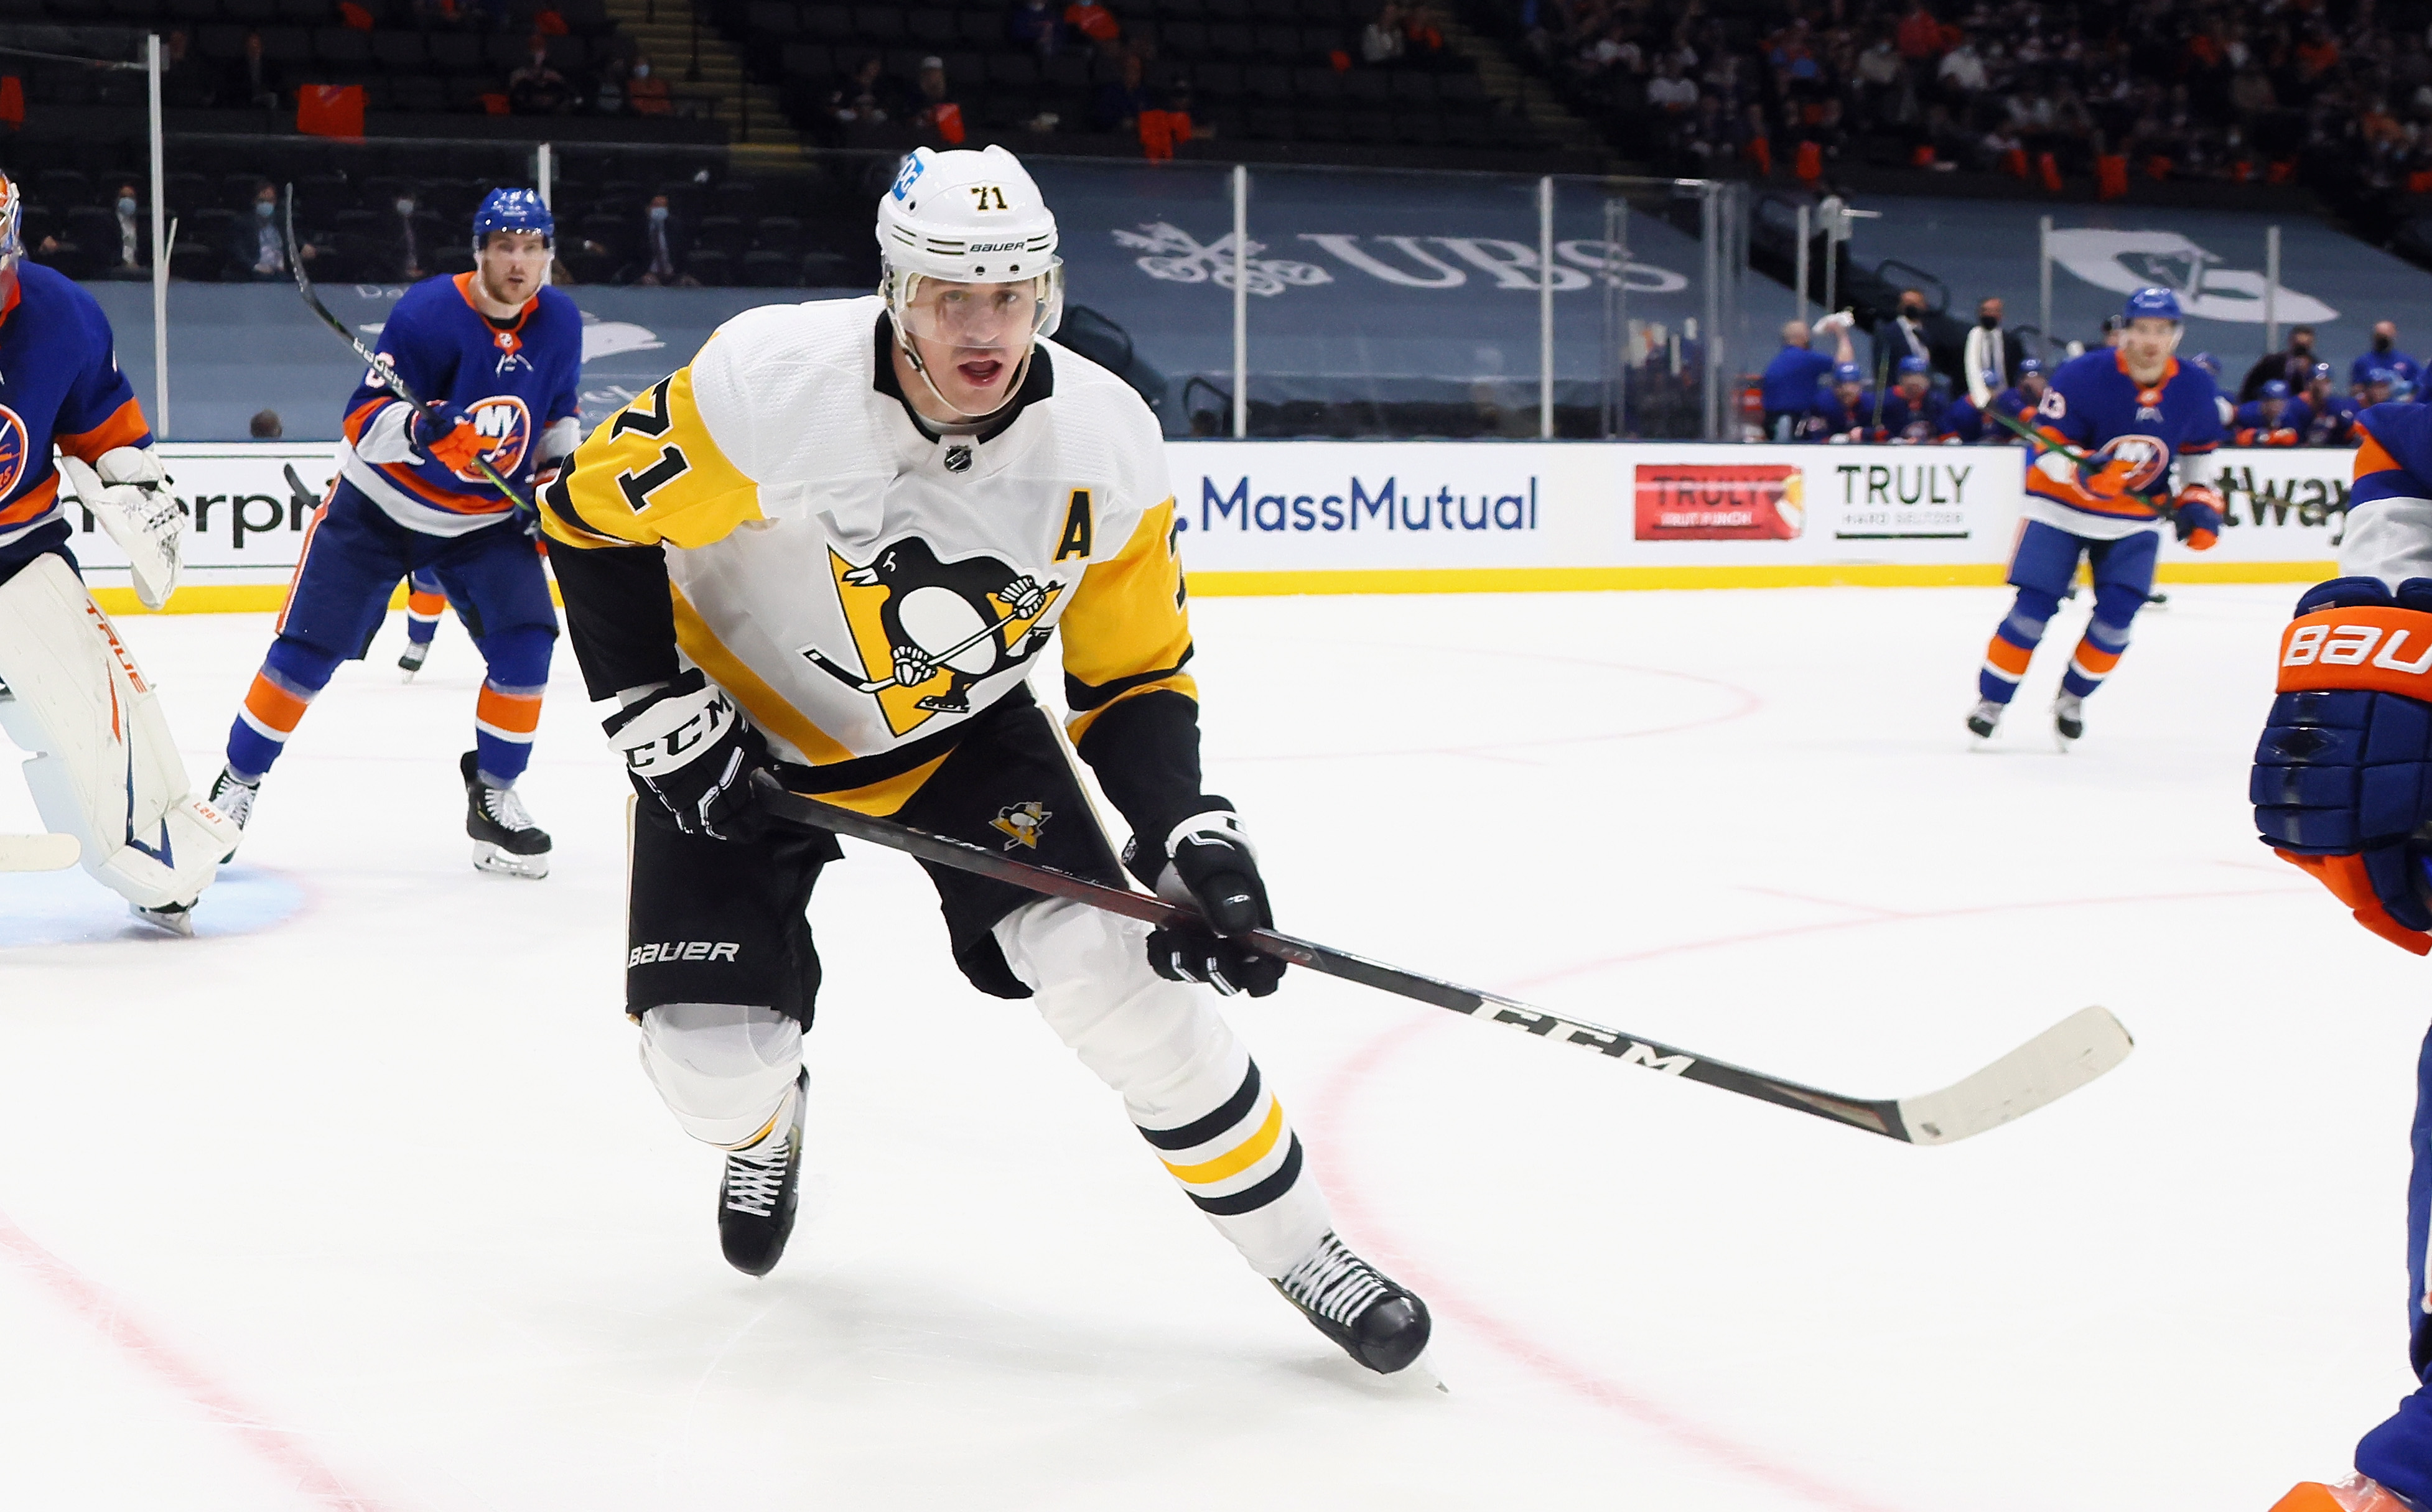 Evgeni Malkin out for the season with torn ACL, MCL - NBC Sports